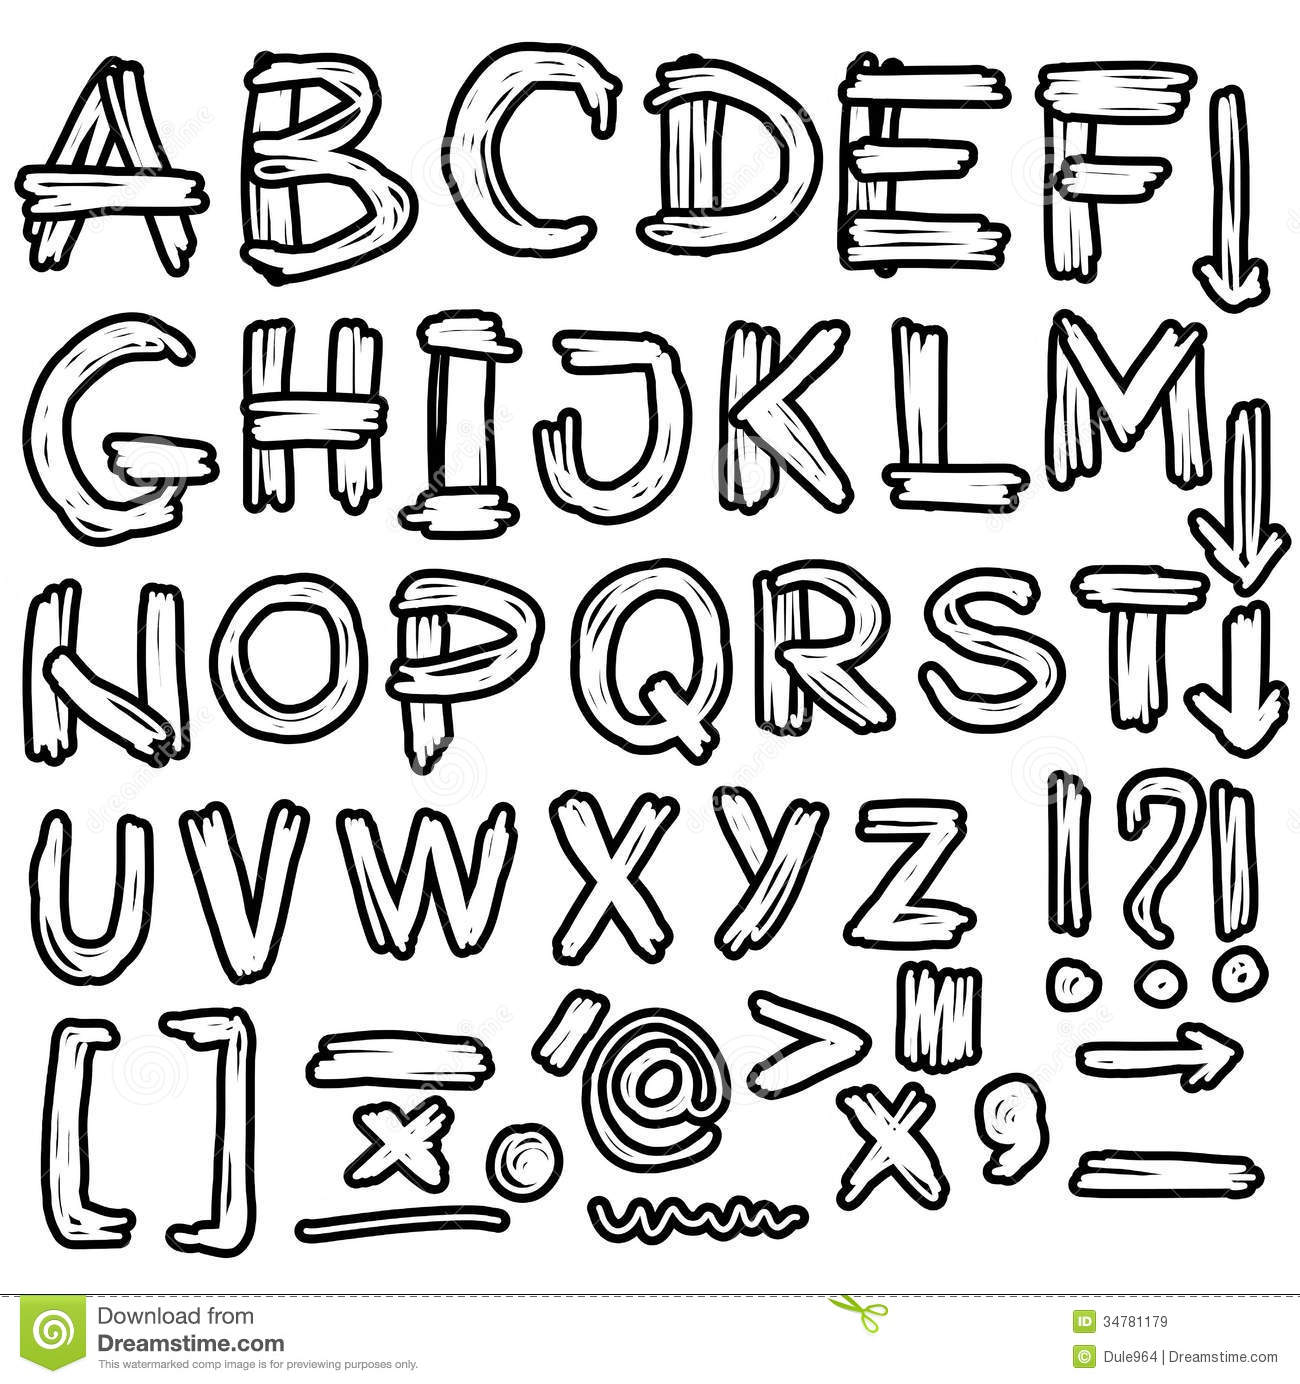 11-drawing-font-styles-images-design-lettering-styles-graffiti-letters-styles-and-old-english